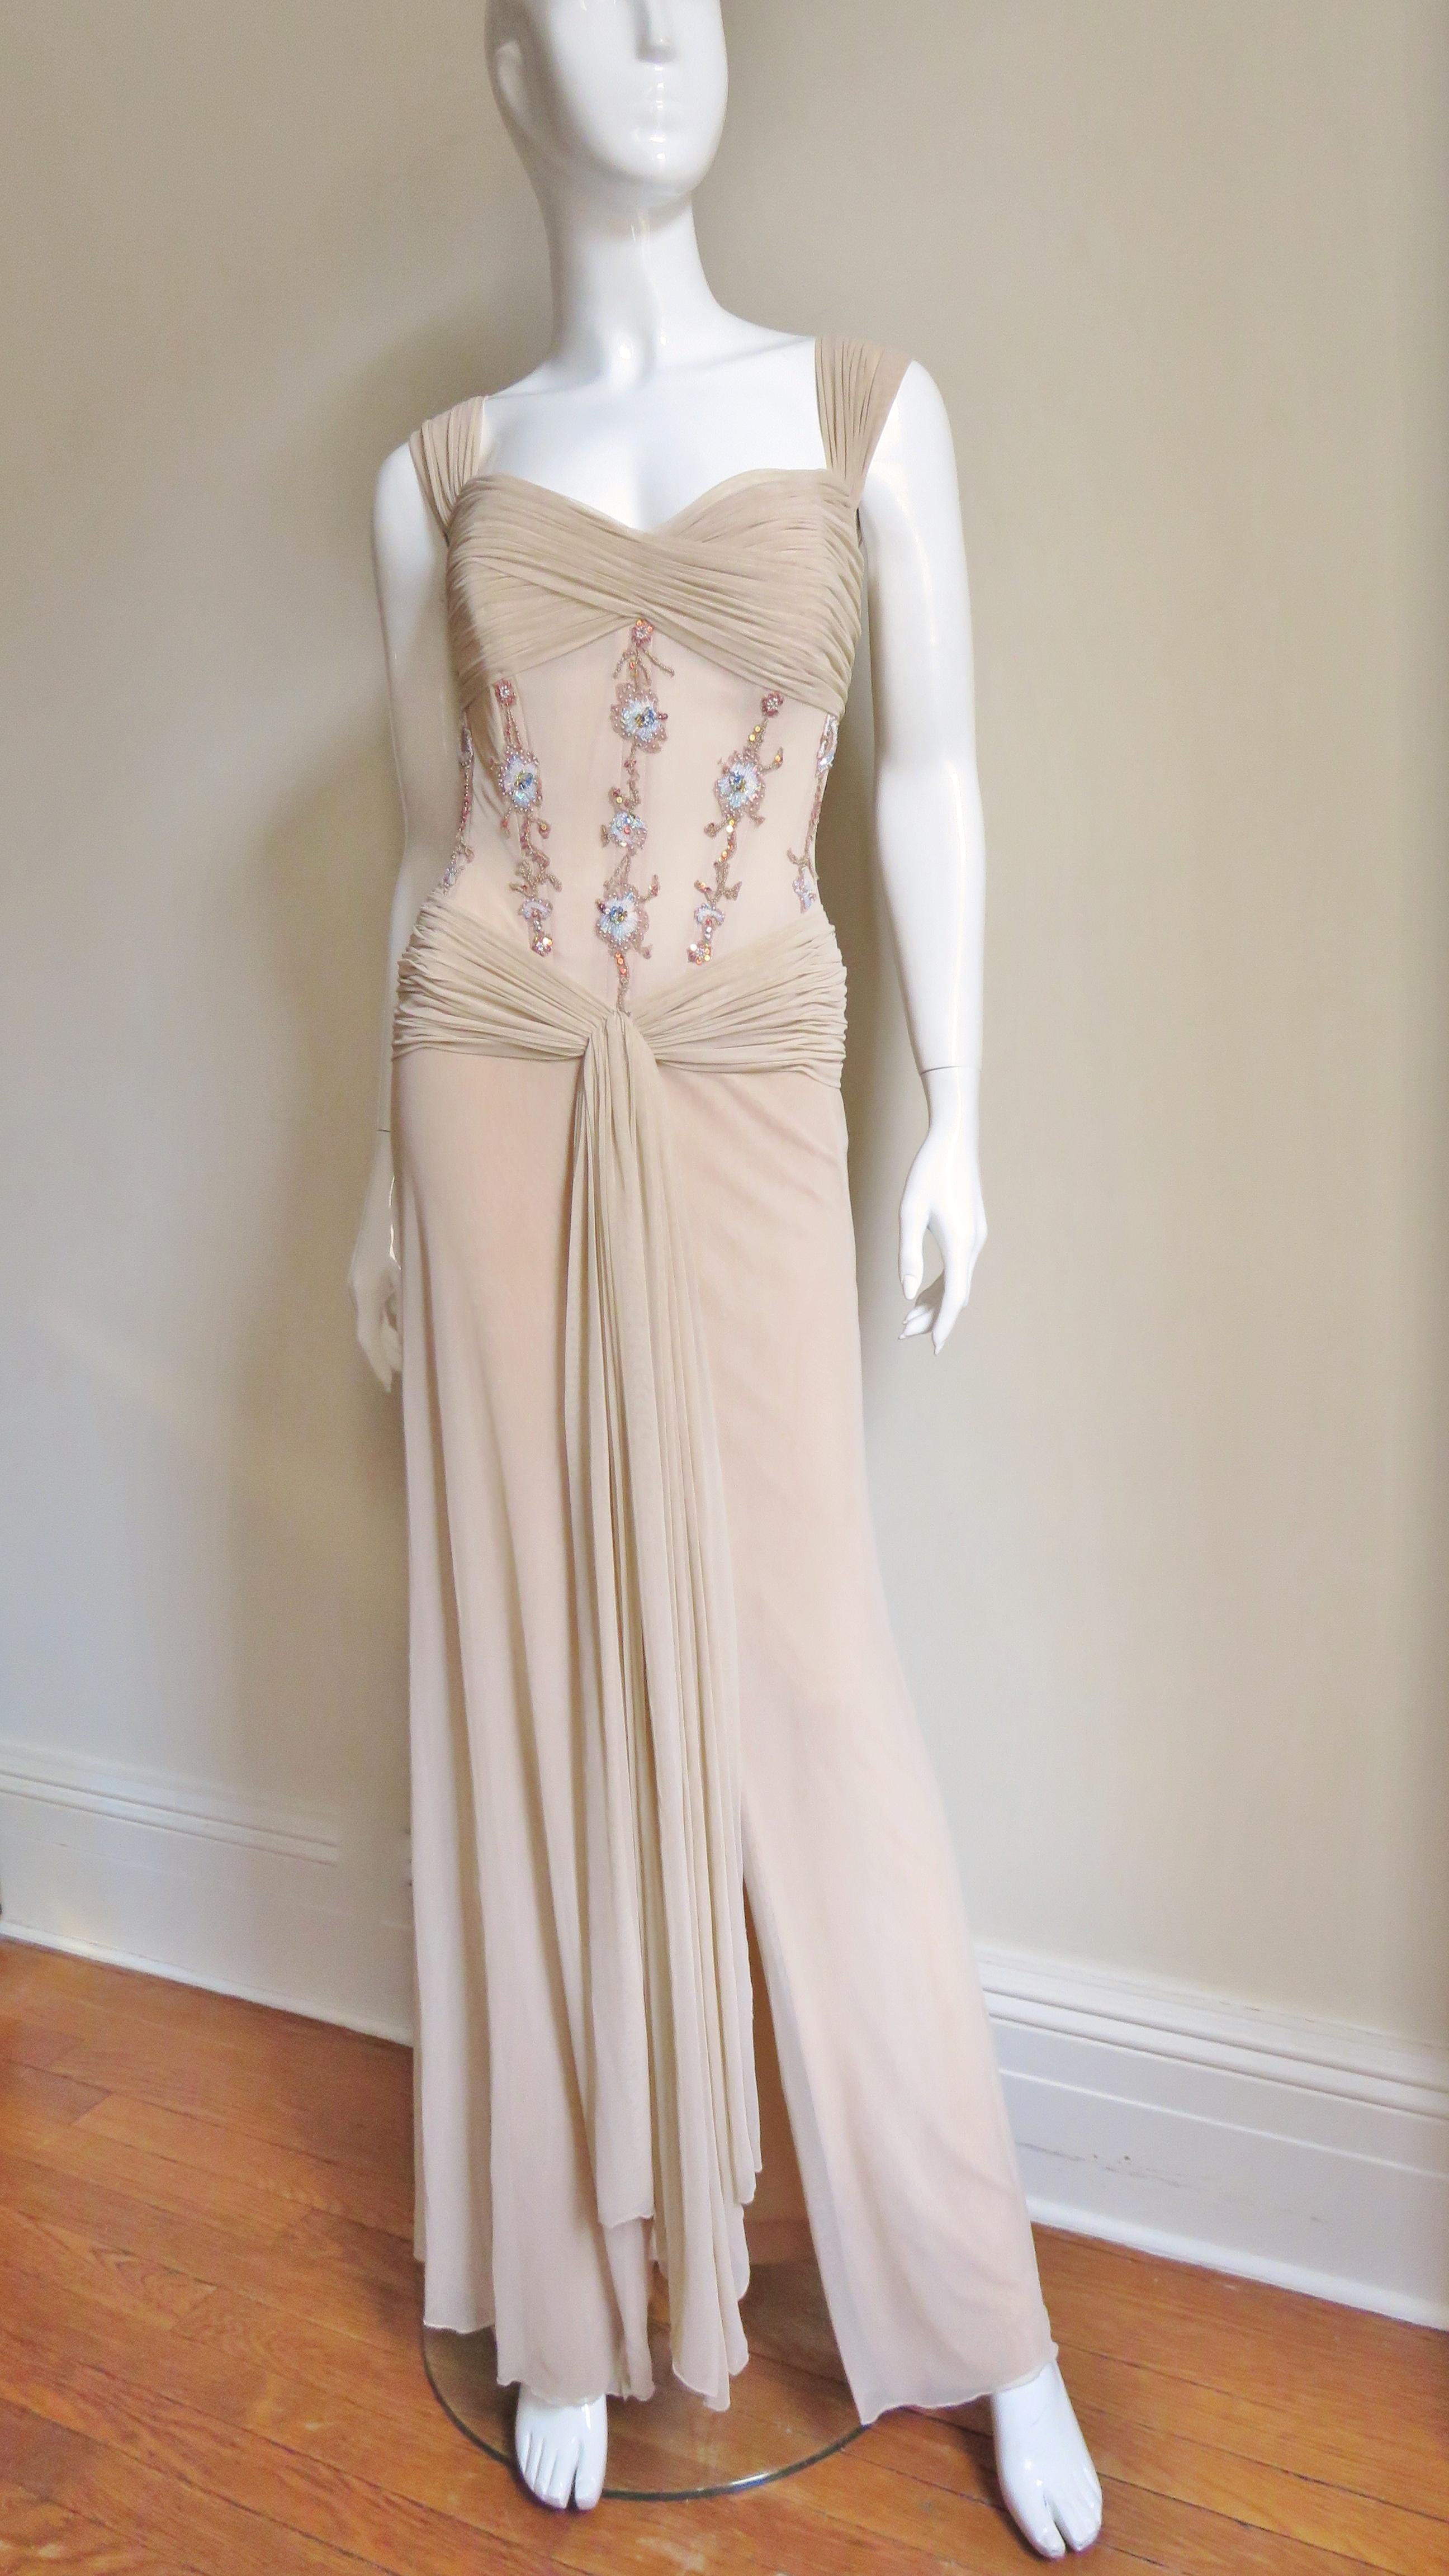 A fabulous beige silk gown from Vicky Tiel Couture.  It has a boned corset style bodice adorned with vertical lines of elaborately beaded flowers. There is a ruched panel across the bust and around the hips of the long A lined skirt. The dress is